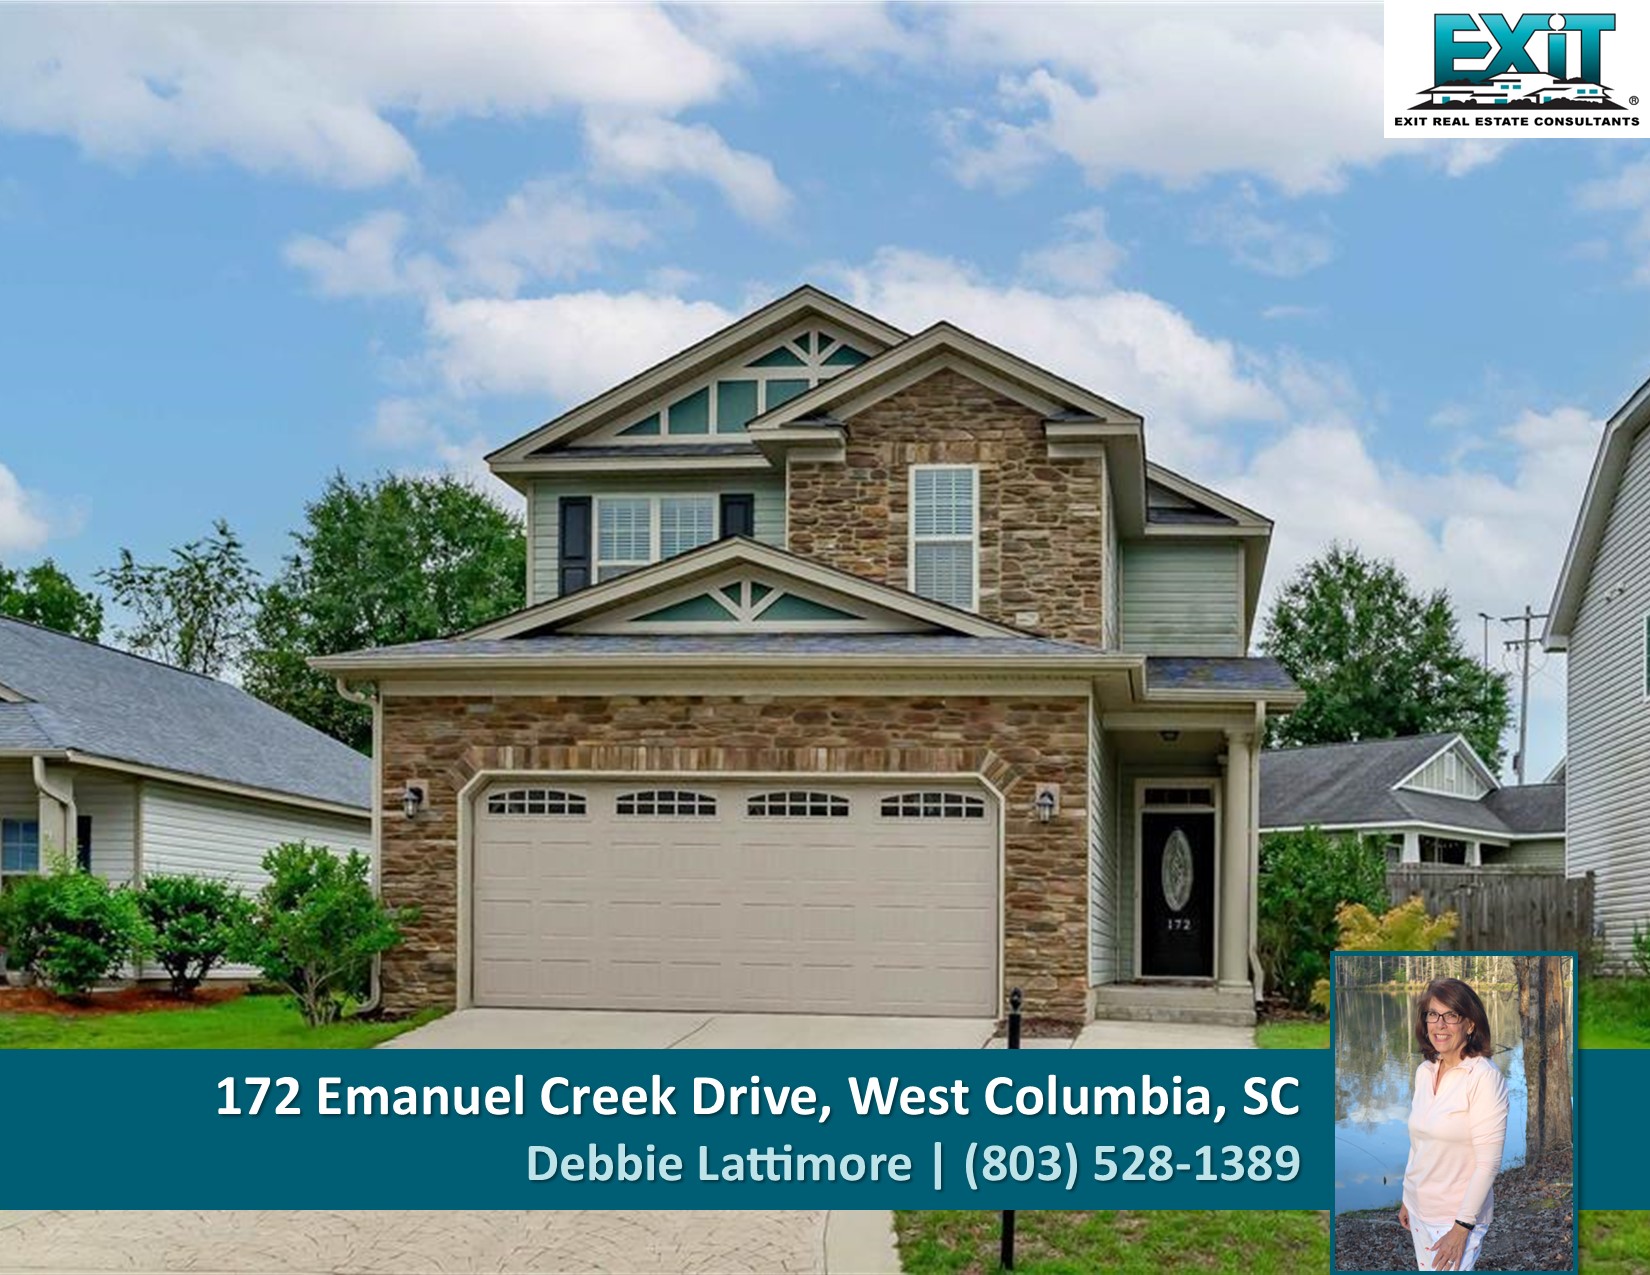 Just listed in Emanuel Creek - West Columbia